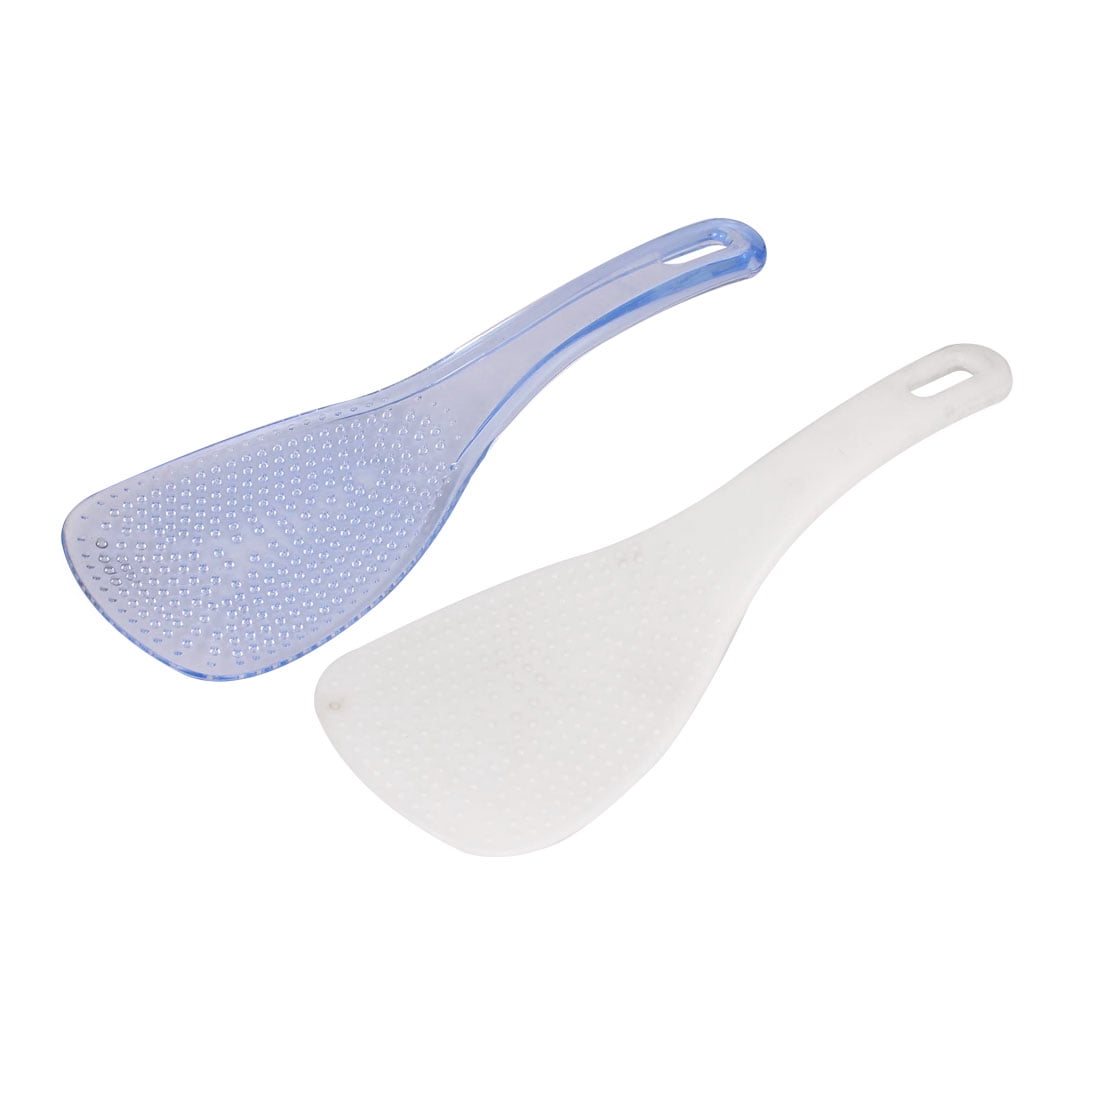 Rice spoon paddle plastic Non Stick white rice cooking scoop Spatula 2Pcs 